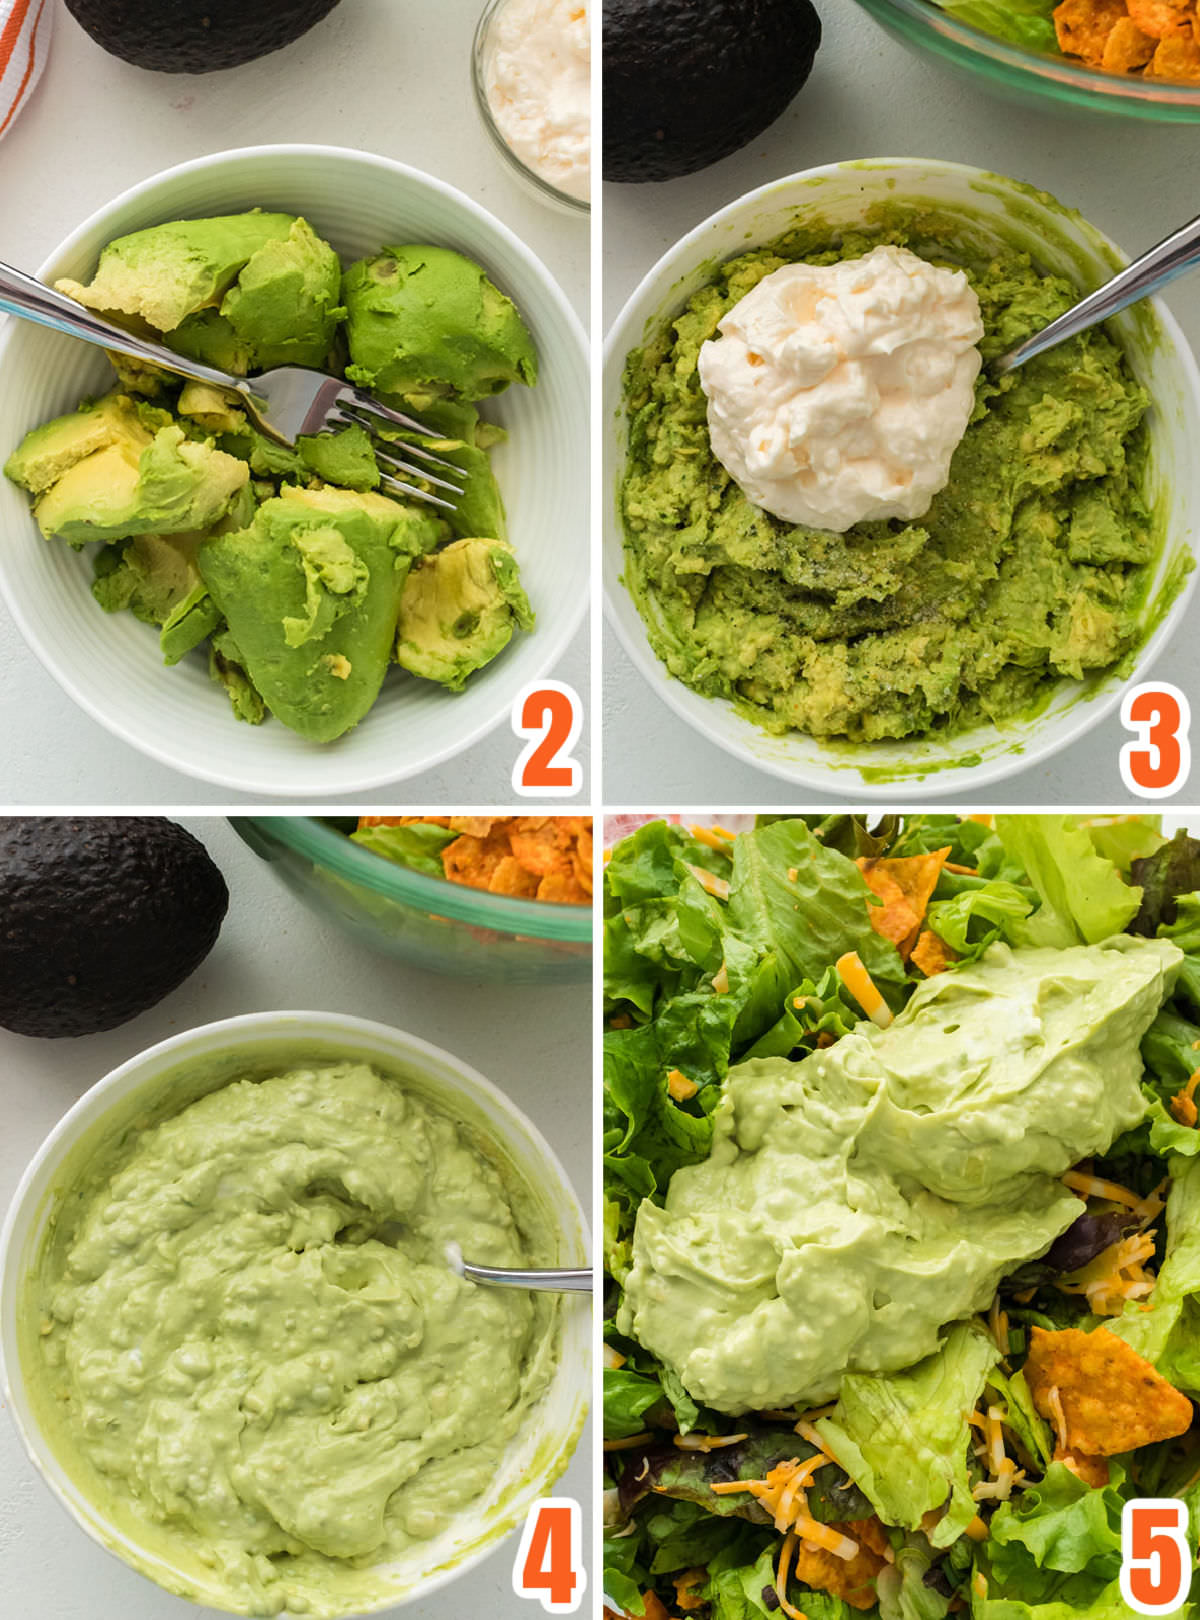 Collage image showing how to make the Avocado Dressing for the Taco Salad.